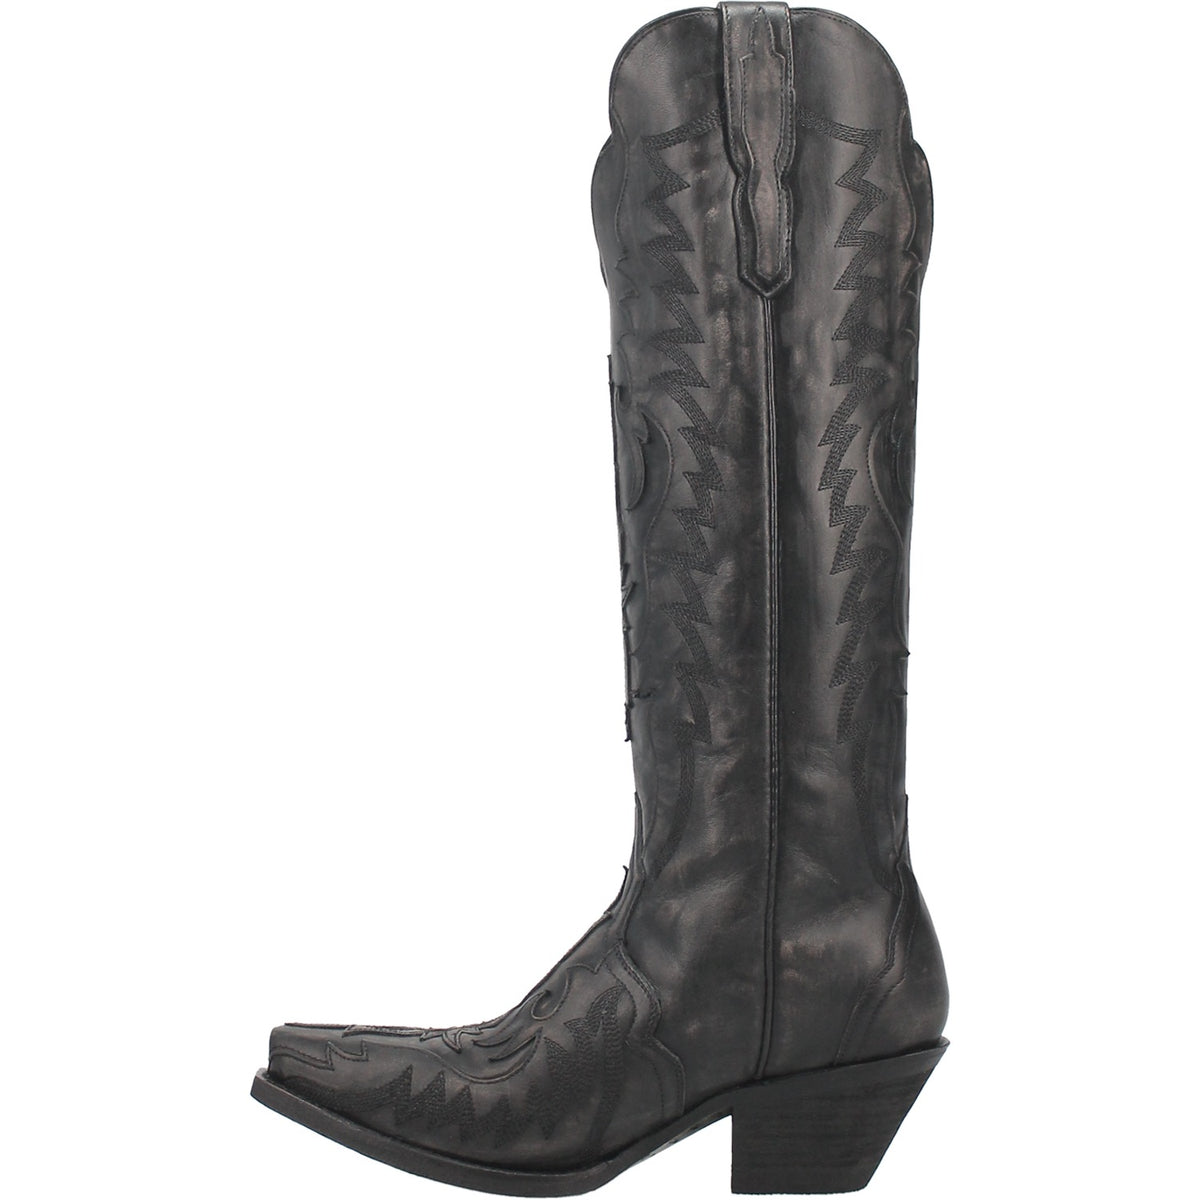 HALLIE LEATHER BOOT Cover